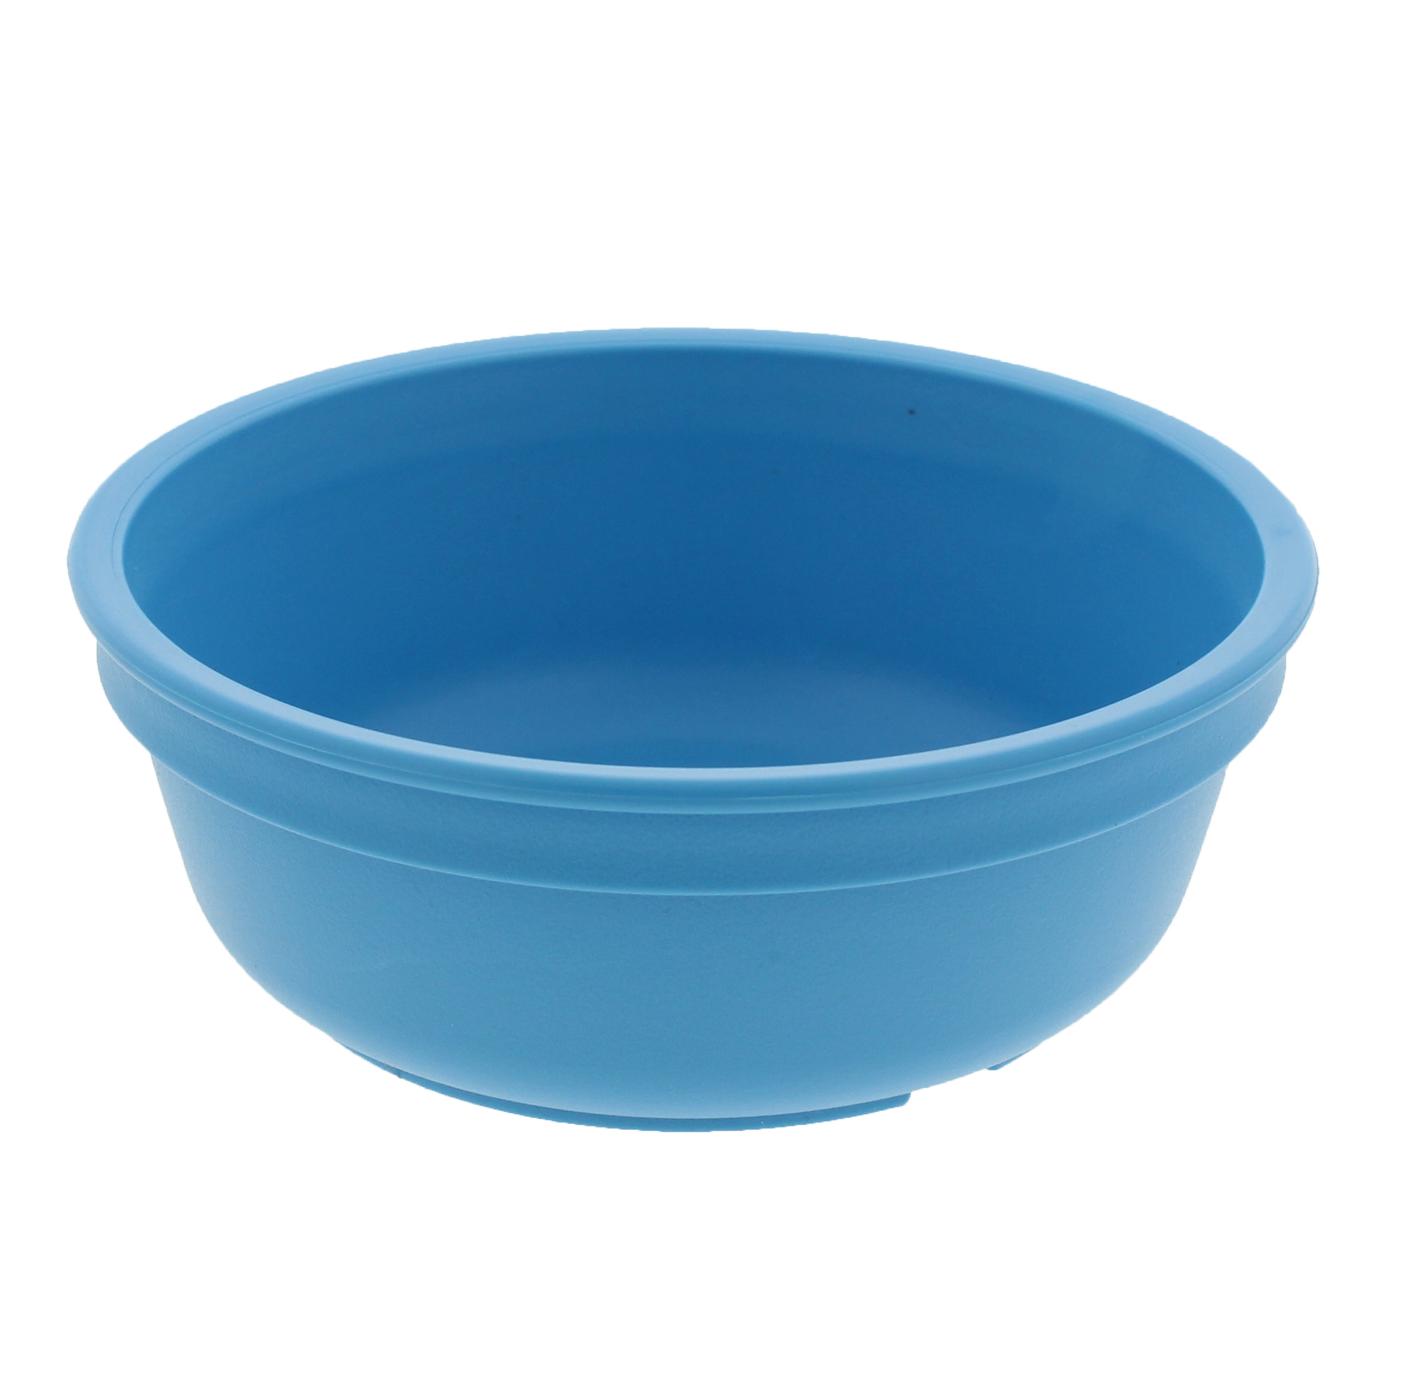 Re-Play Toddler Bowl, Assorted Colors; image 1 of 6